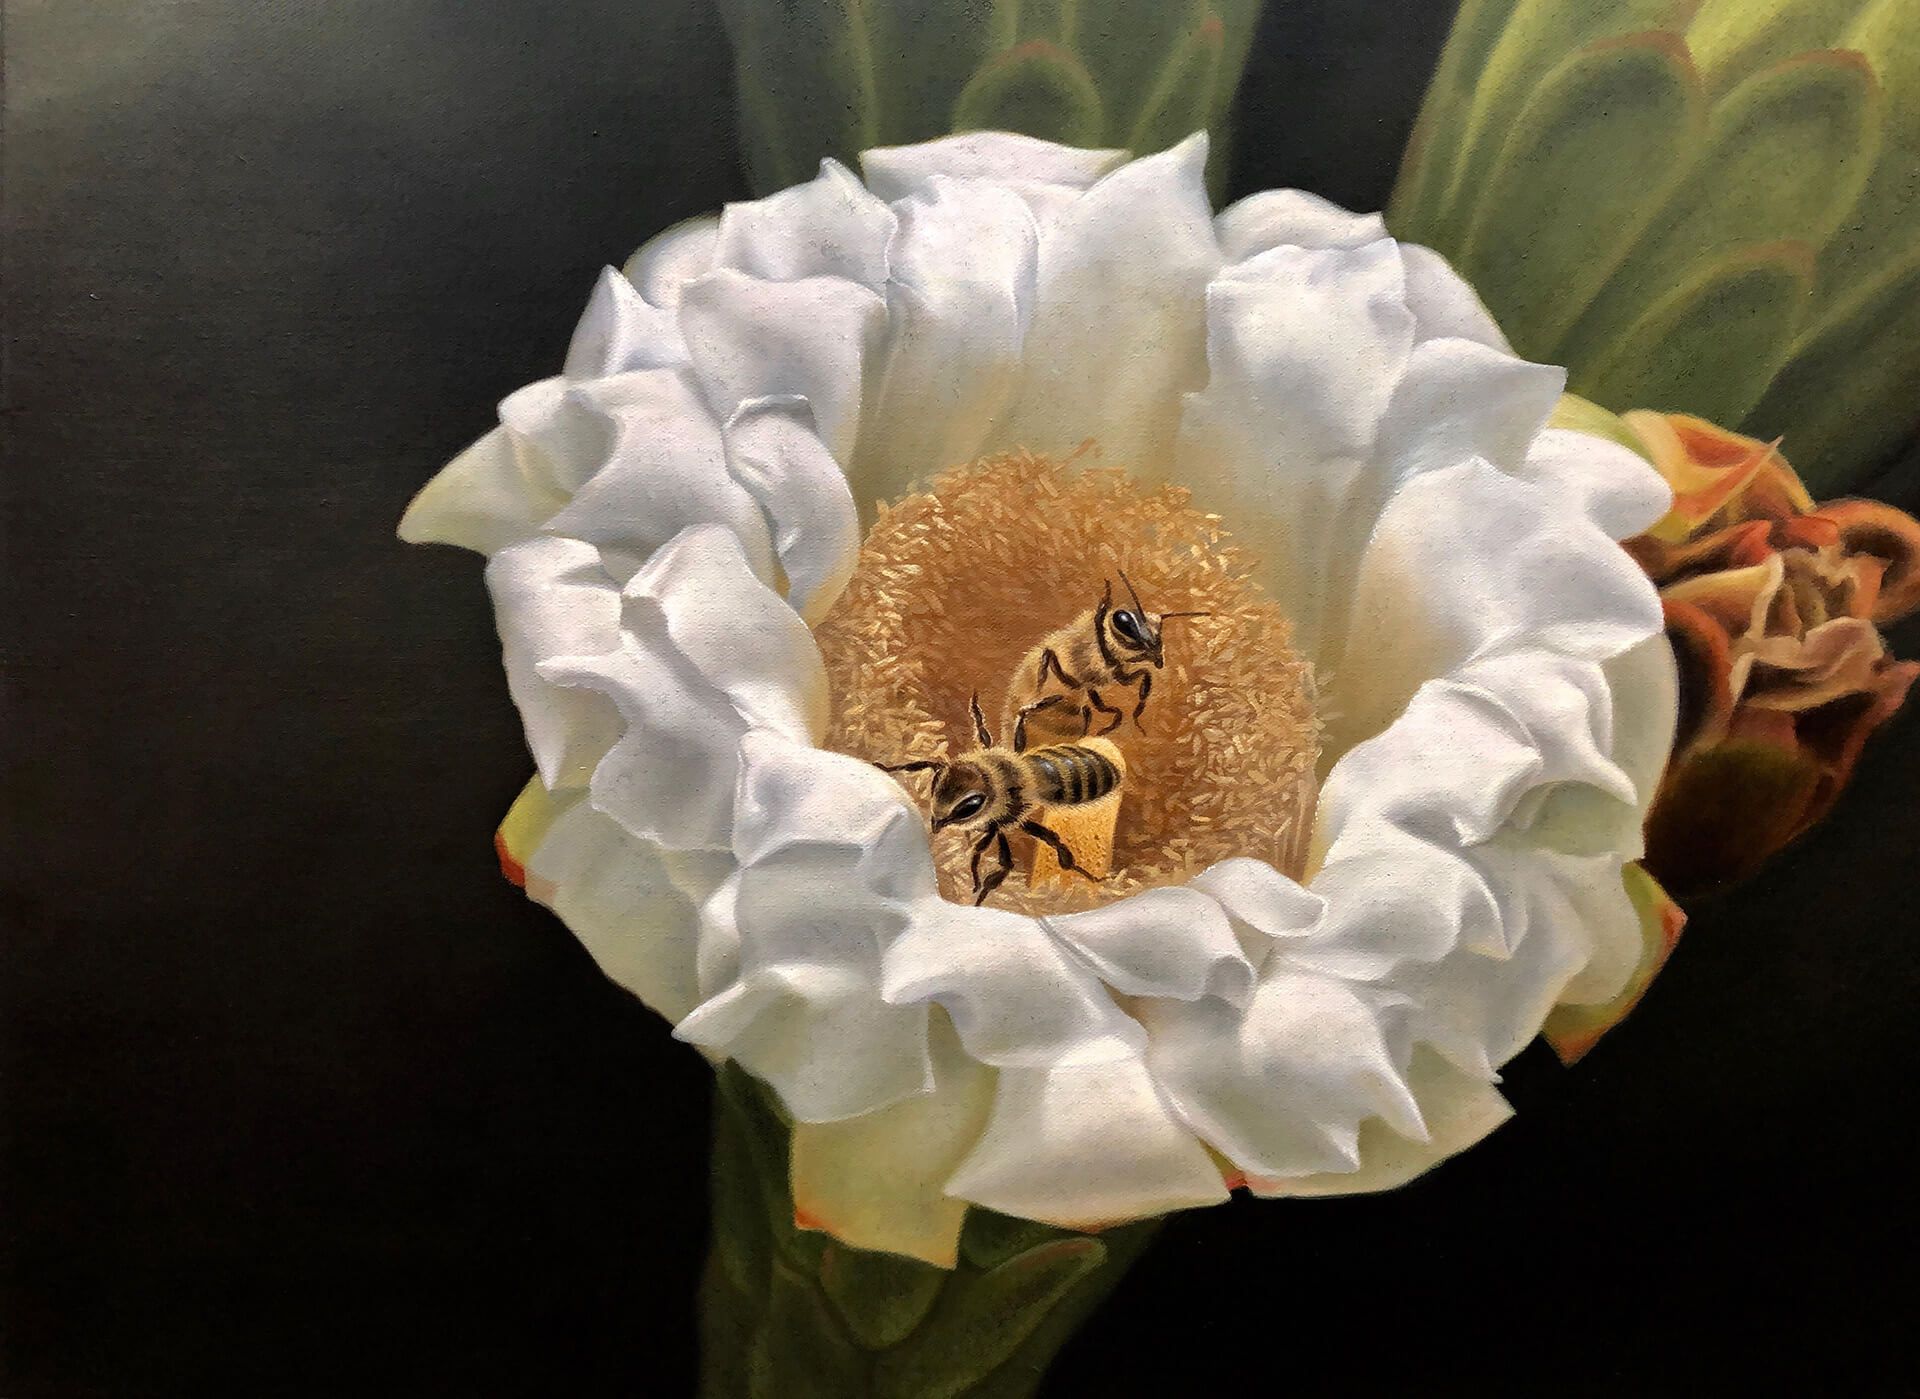 Photorealistic painting of two bees in a cactus bloom